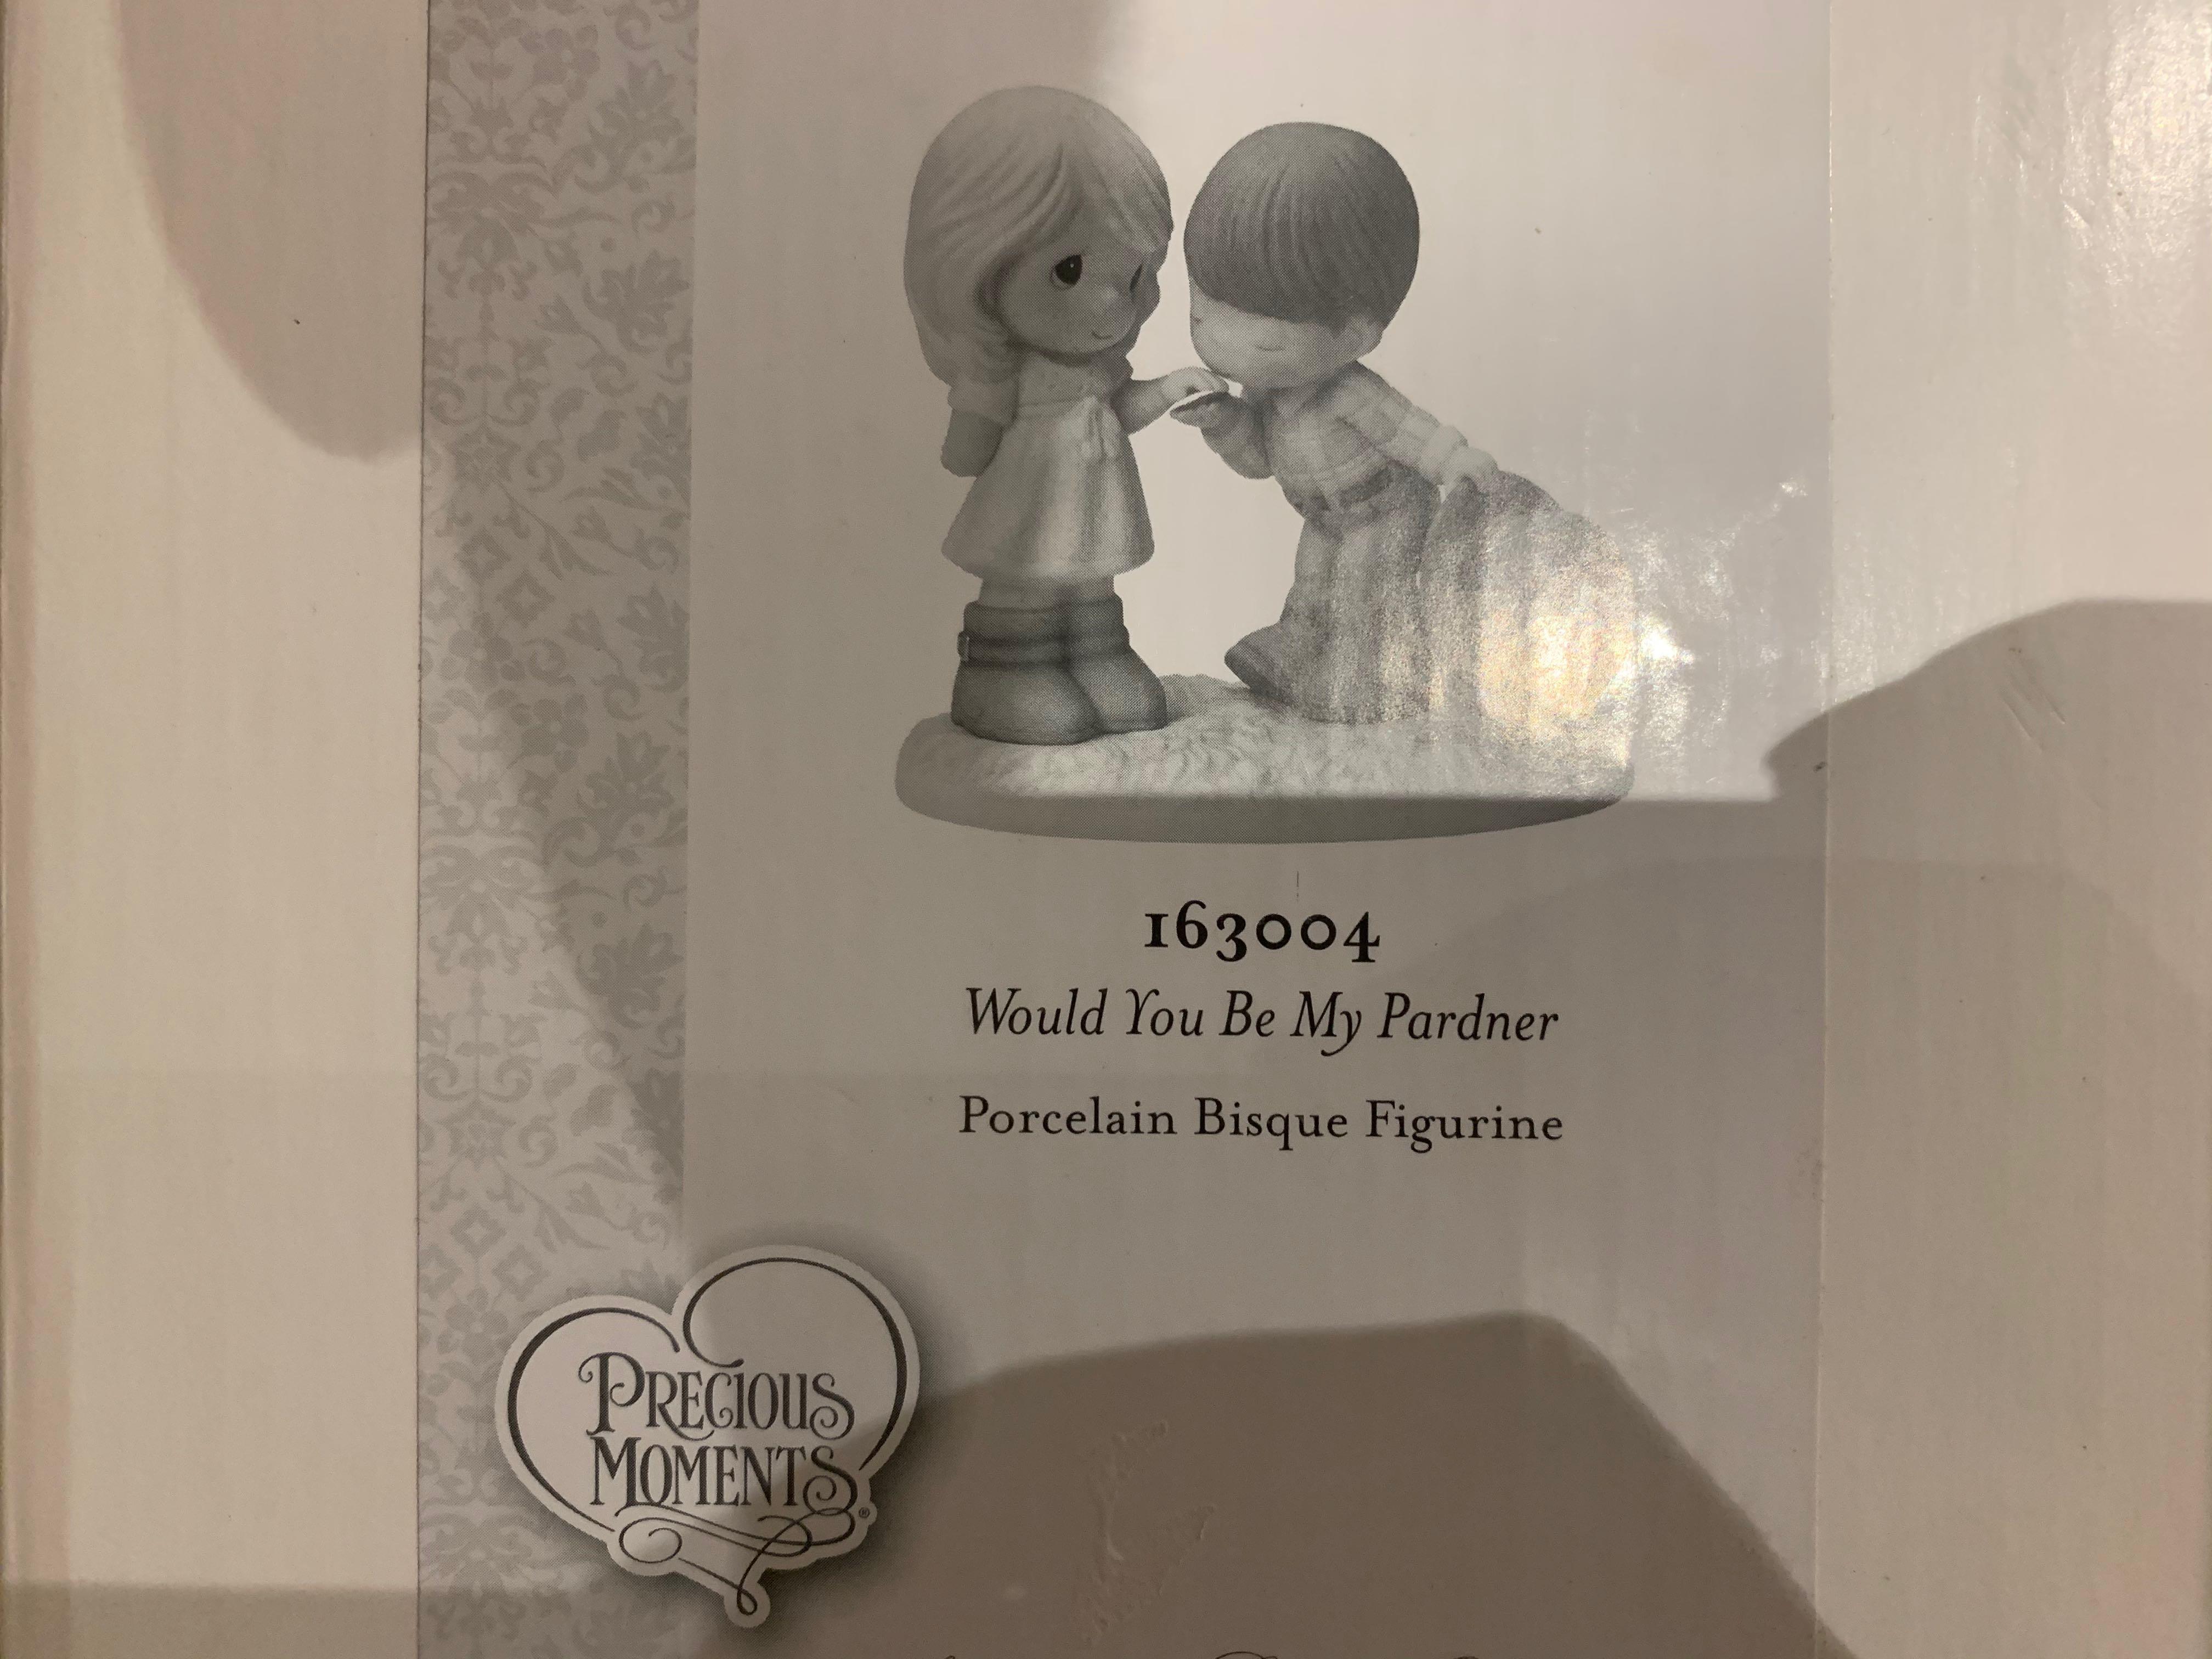 Precious Moments #163004 /"Would You Be My Pardner/" Porcelain Bisque Figurine New